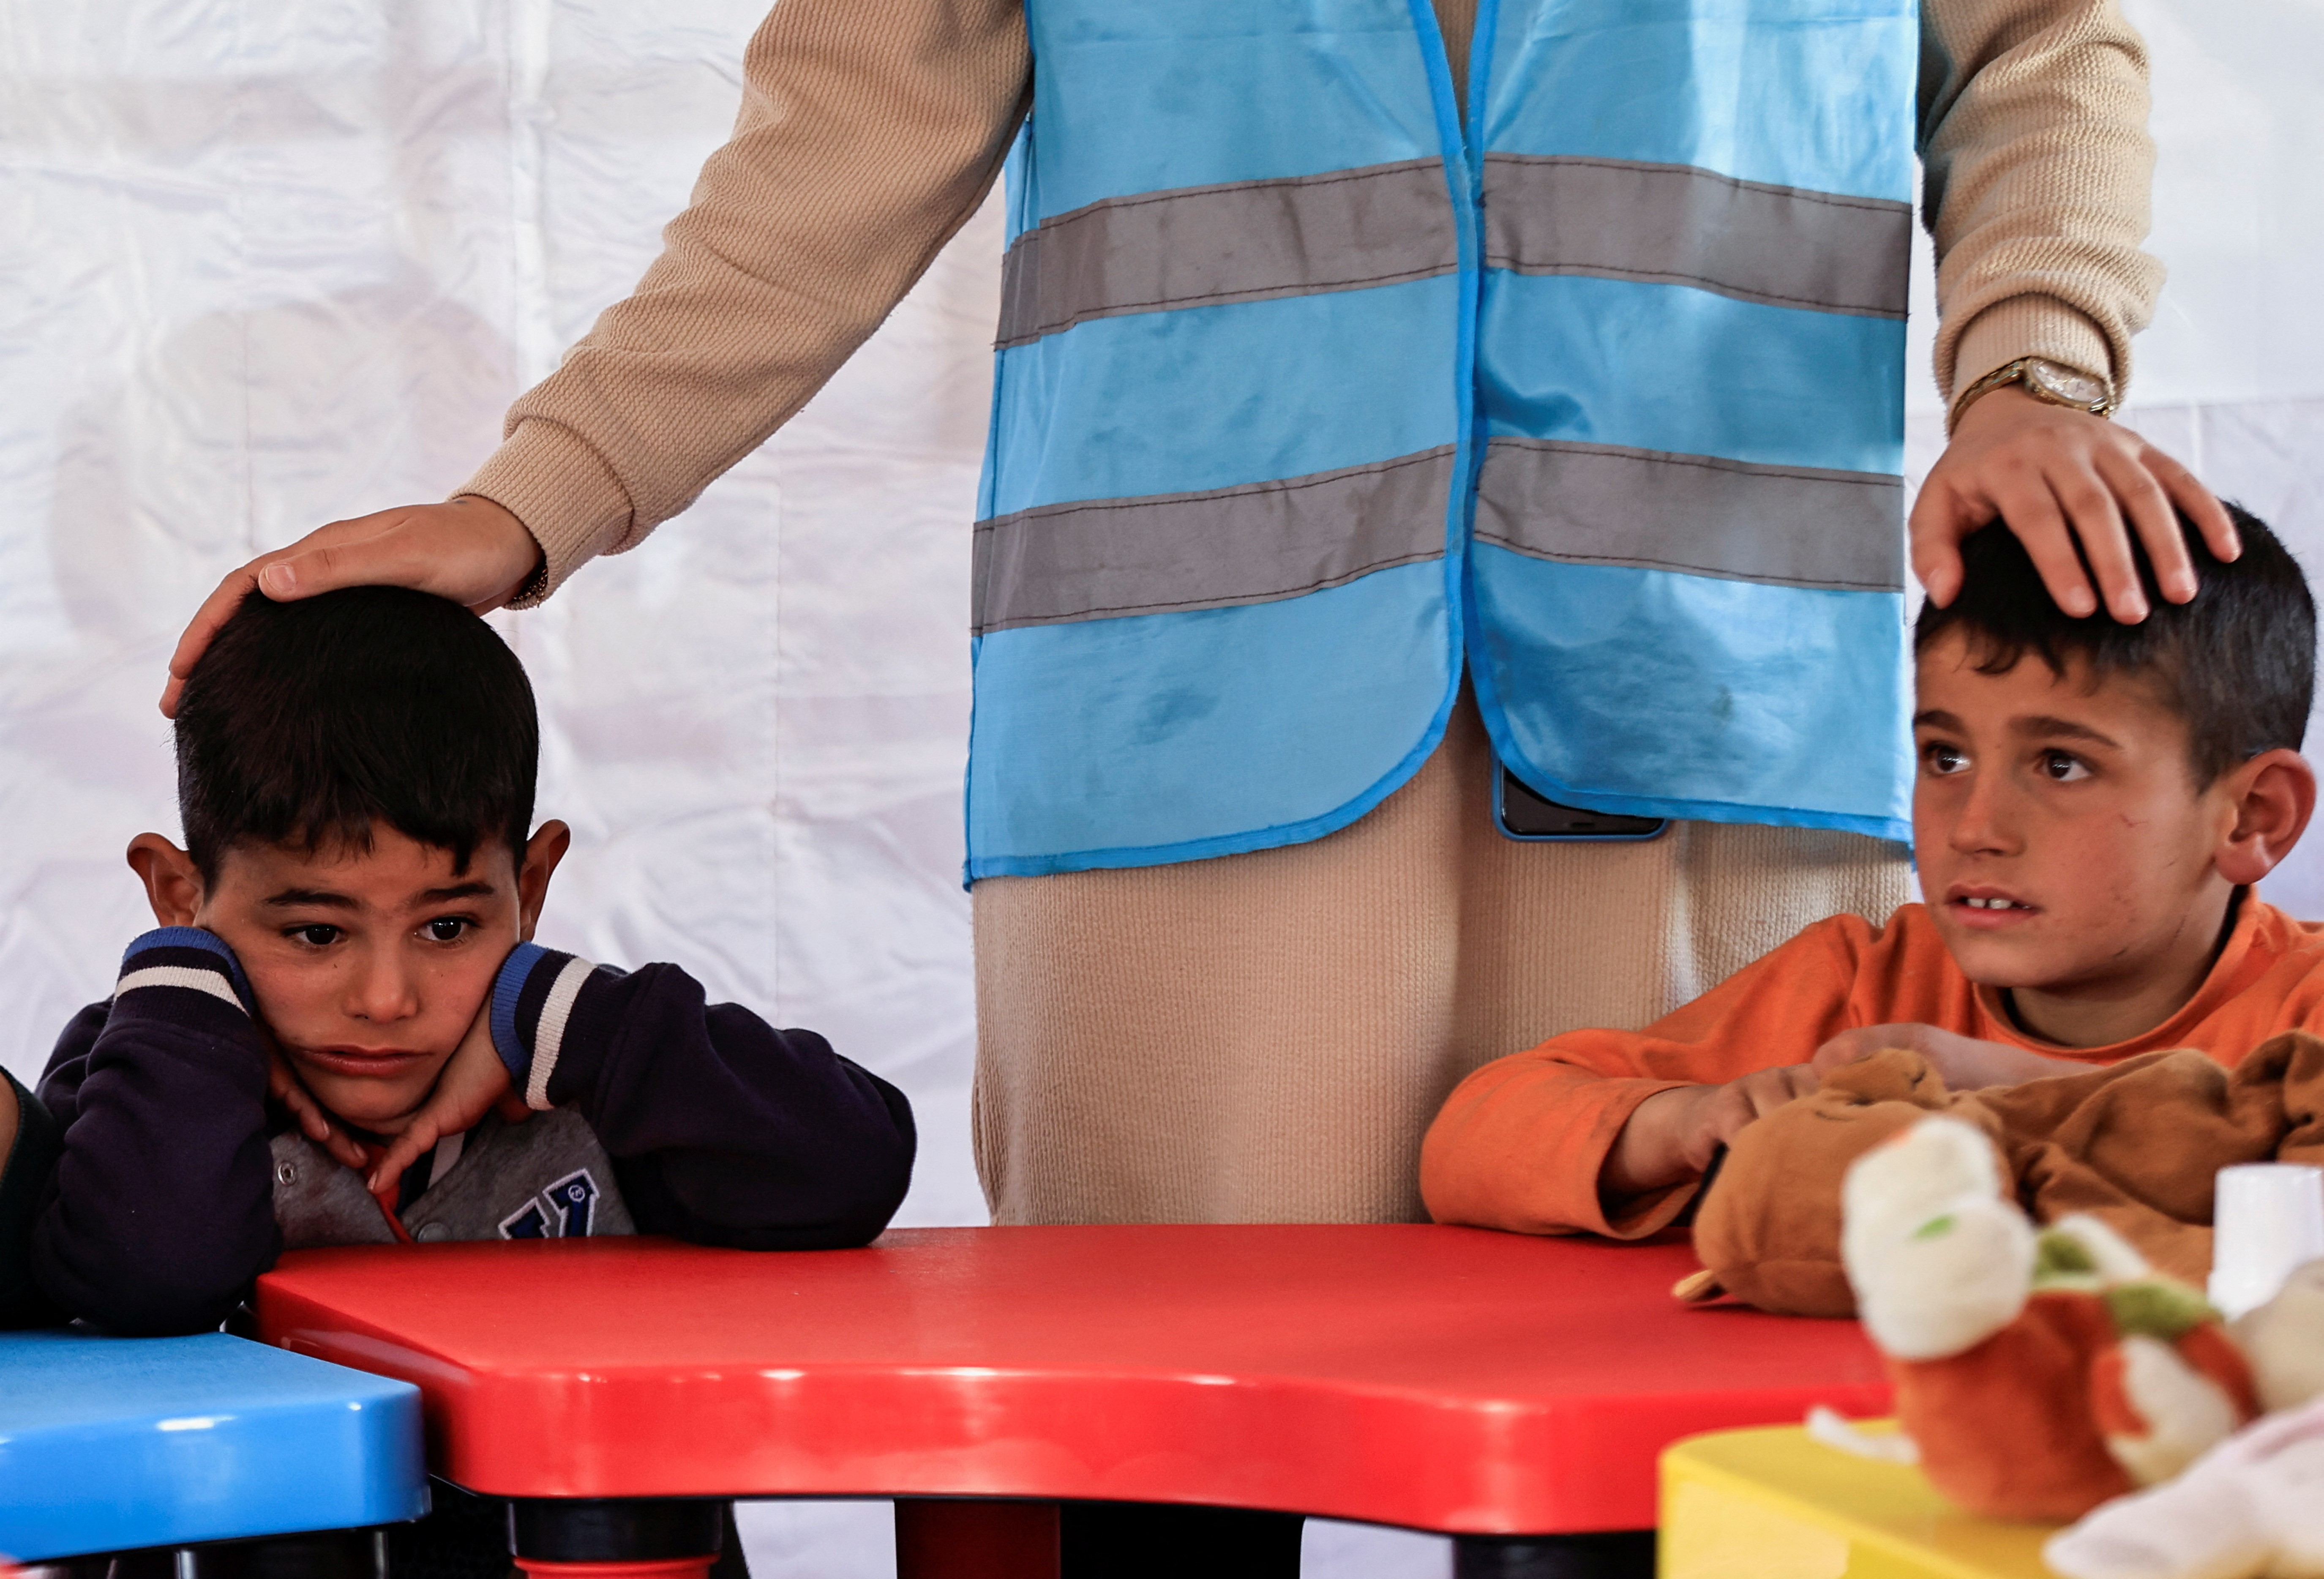 Children attend an activity to entertain and support the mental health of children affected by the deadly earthquake, at a camp for survivors, in Adiyaman, Turkey, February 18, 2023. Photo: Reuters